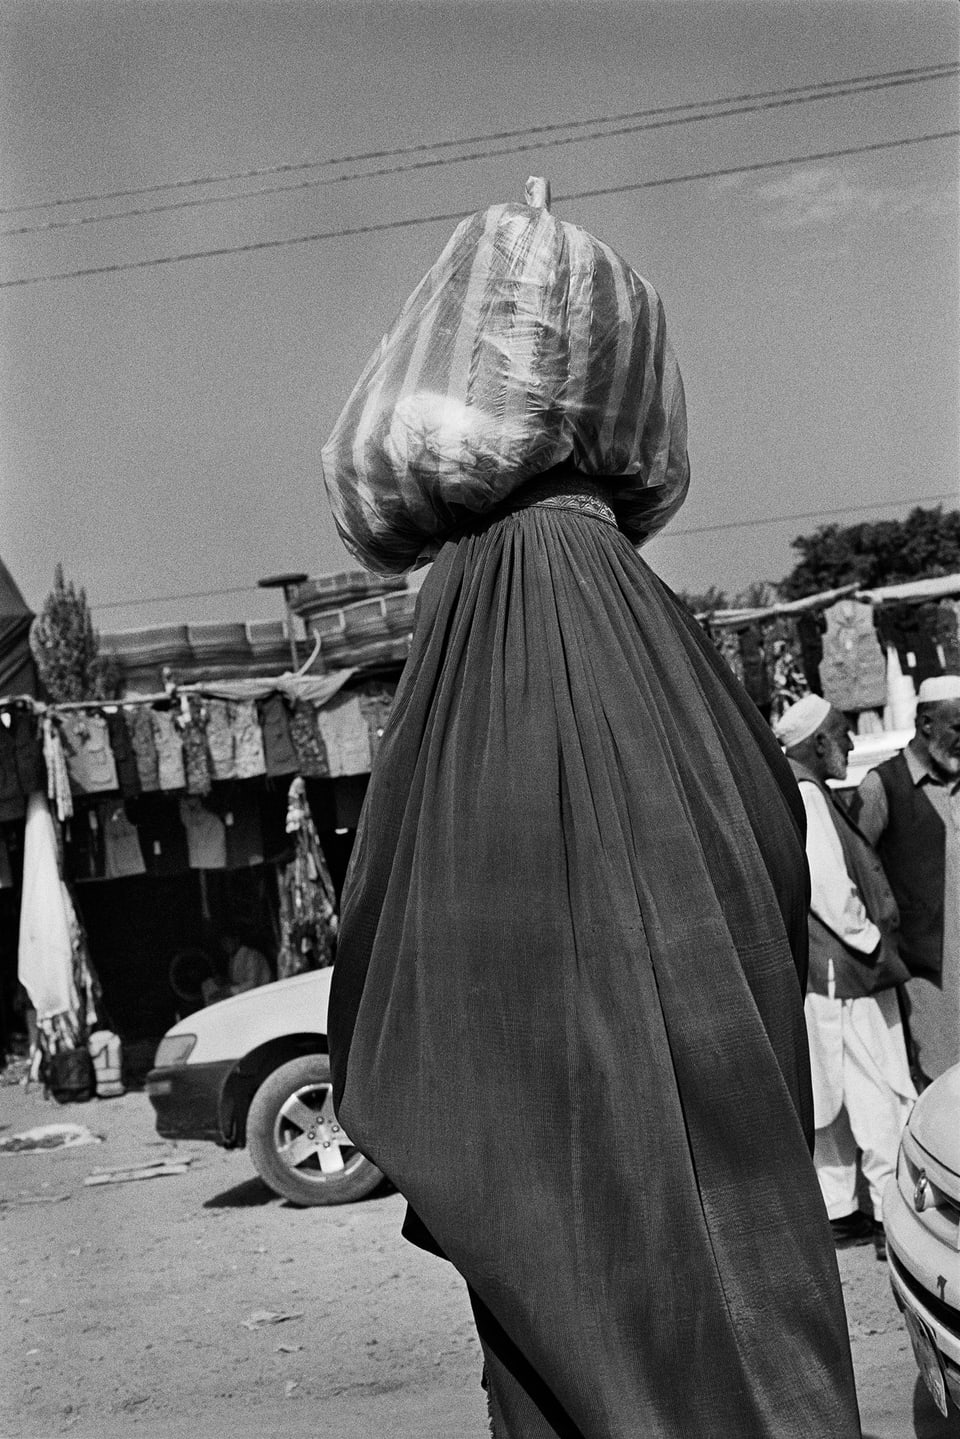 Black and white photo of a street scene.  In the middle of the picture there is a person with a filled plastic bag on his head